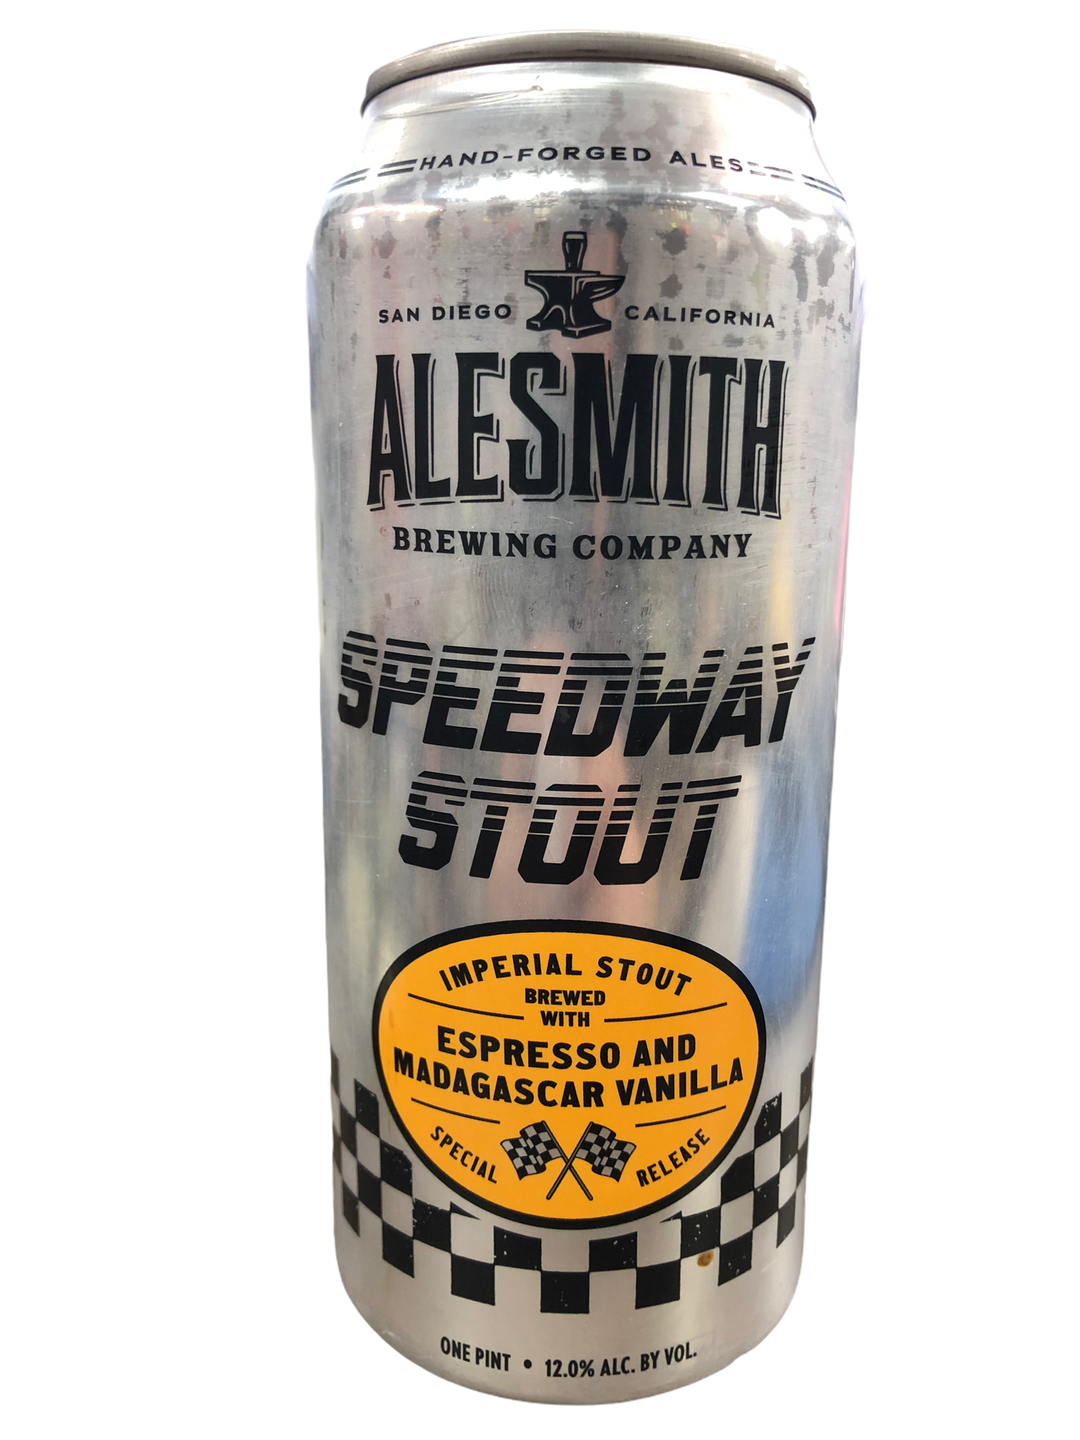 Buy Alesmith Speedway Stout with Espresso and Madagascar Vanilla Online -Craft City